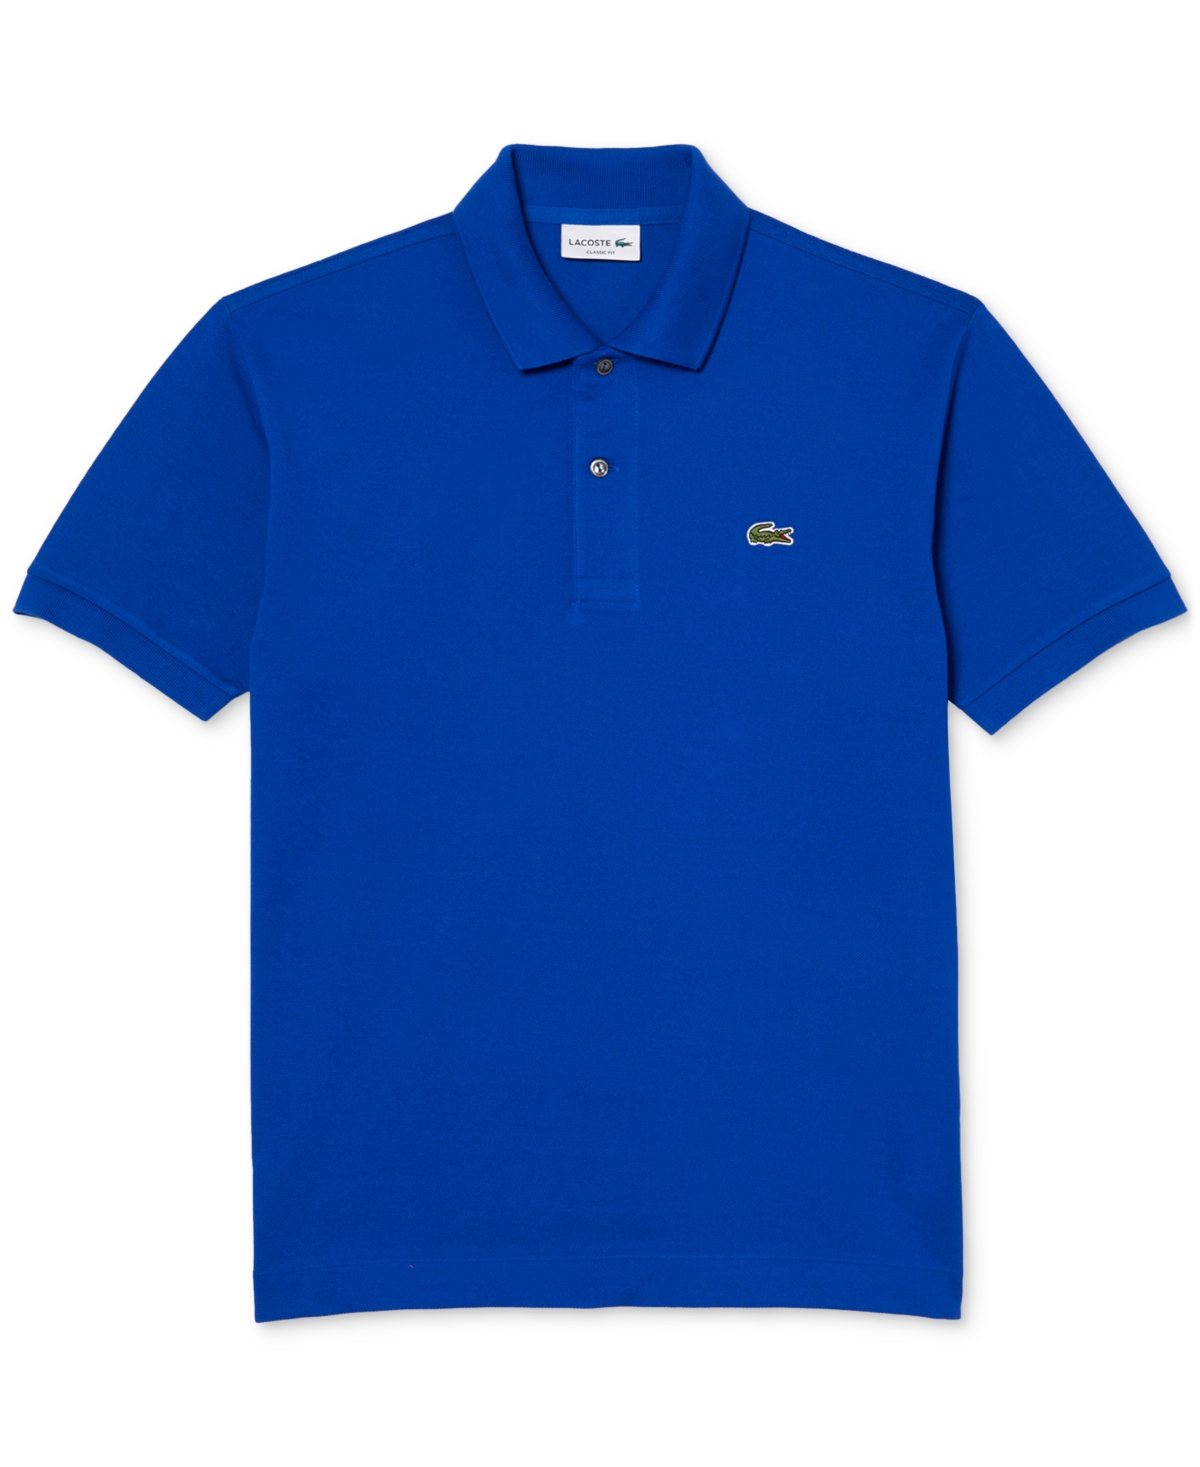 Lacoste Men's Classic Fit L.12.12 Polo In Siy Hilo